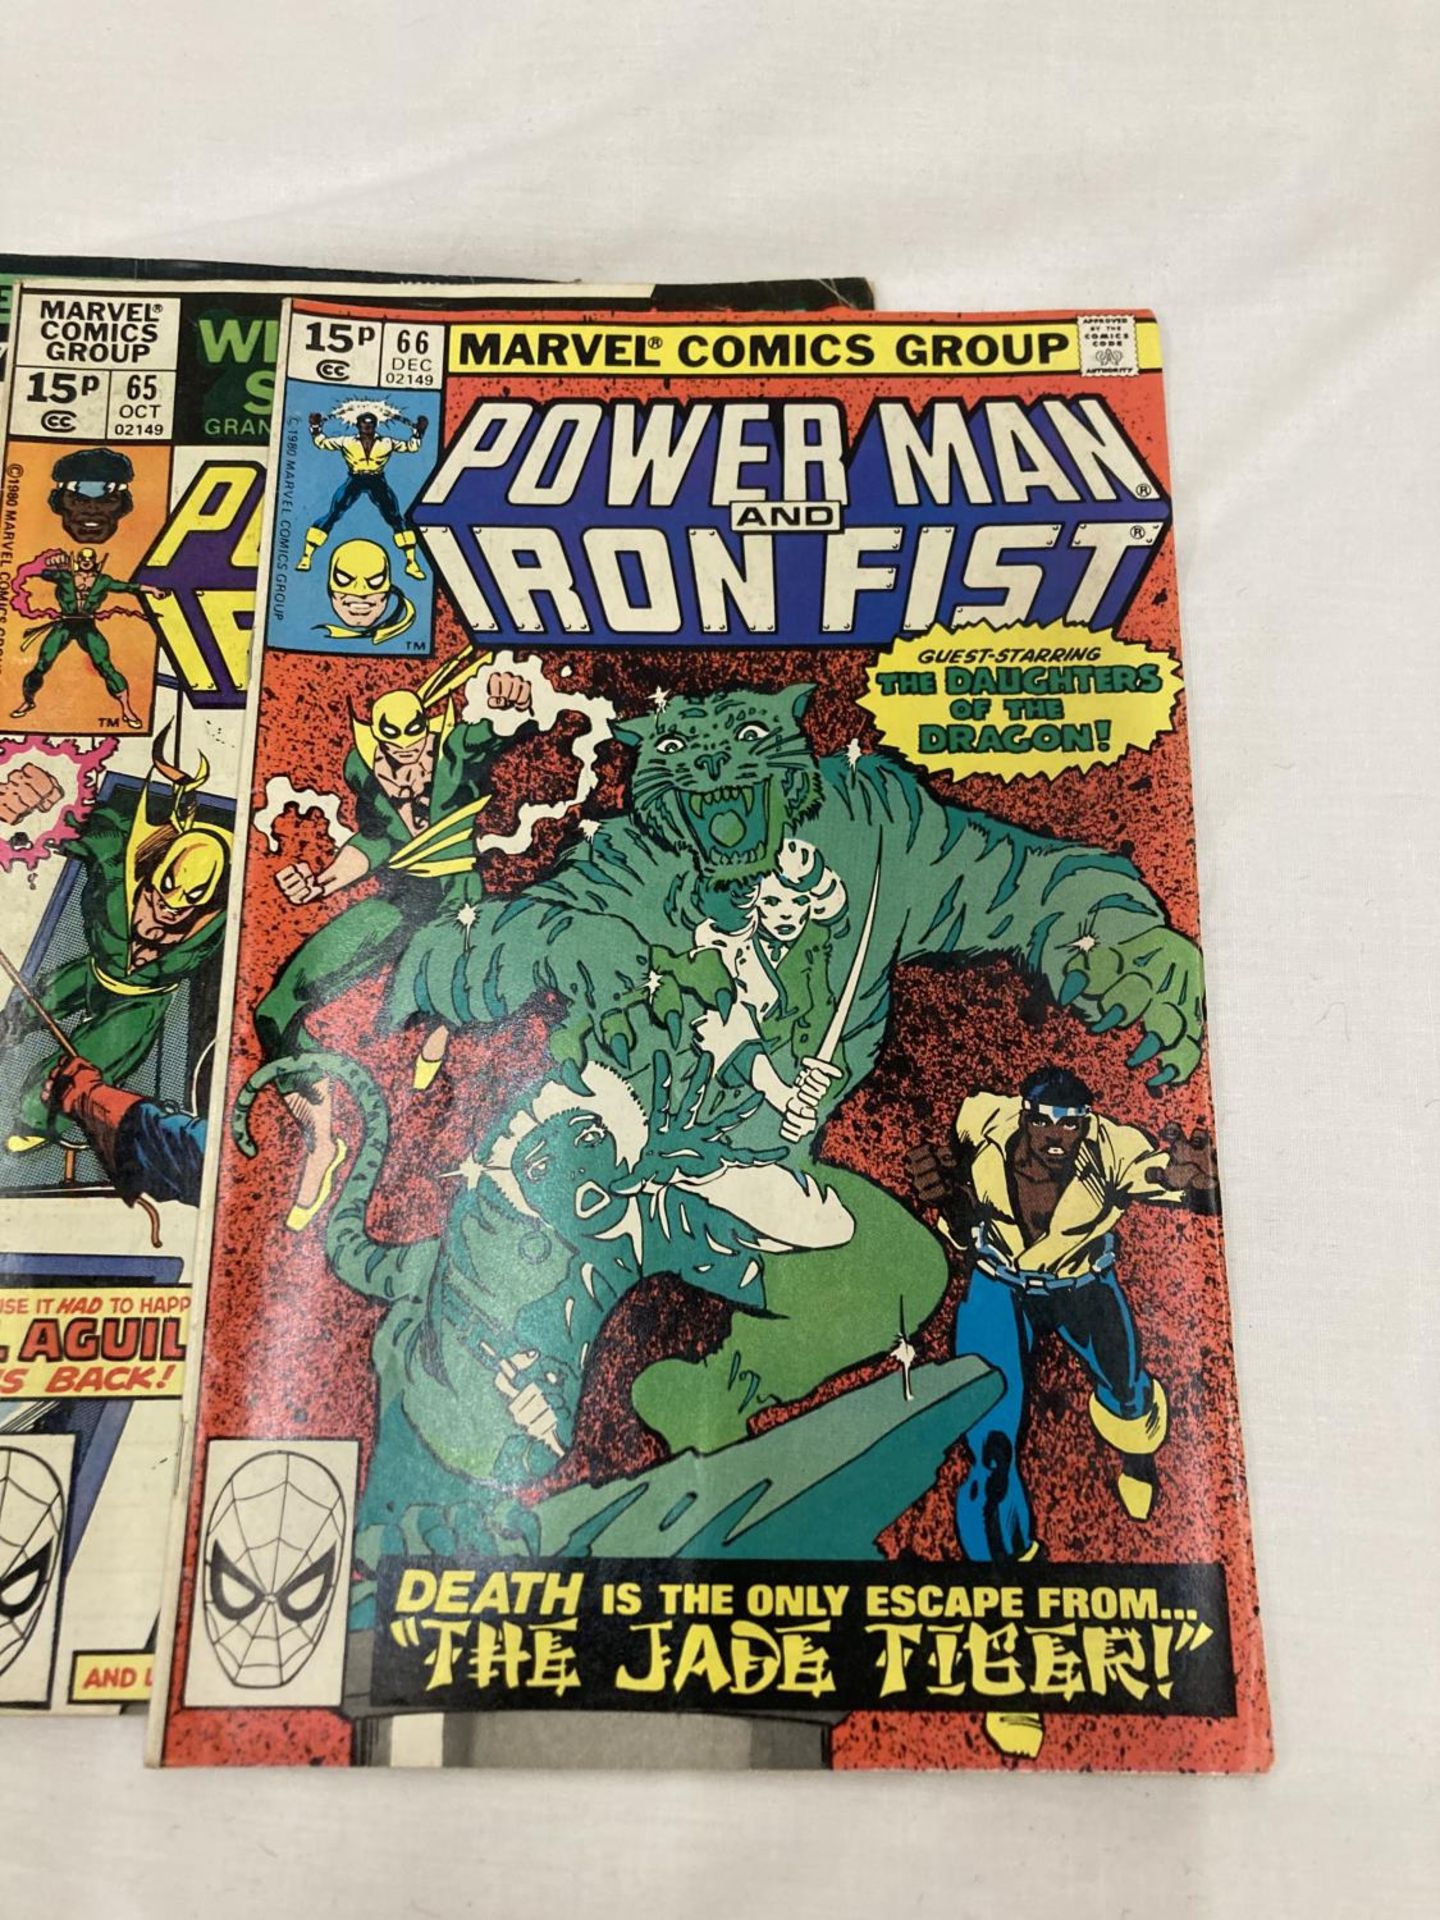 FIVE VINTAGE MARVEL POWERMAN AND IRON FISH COMICS FROM THE 1970'S - Image 8 of 14